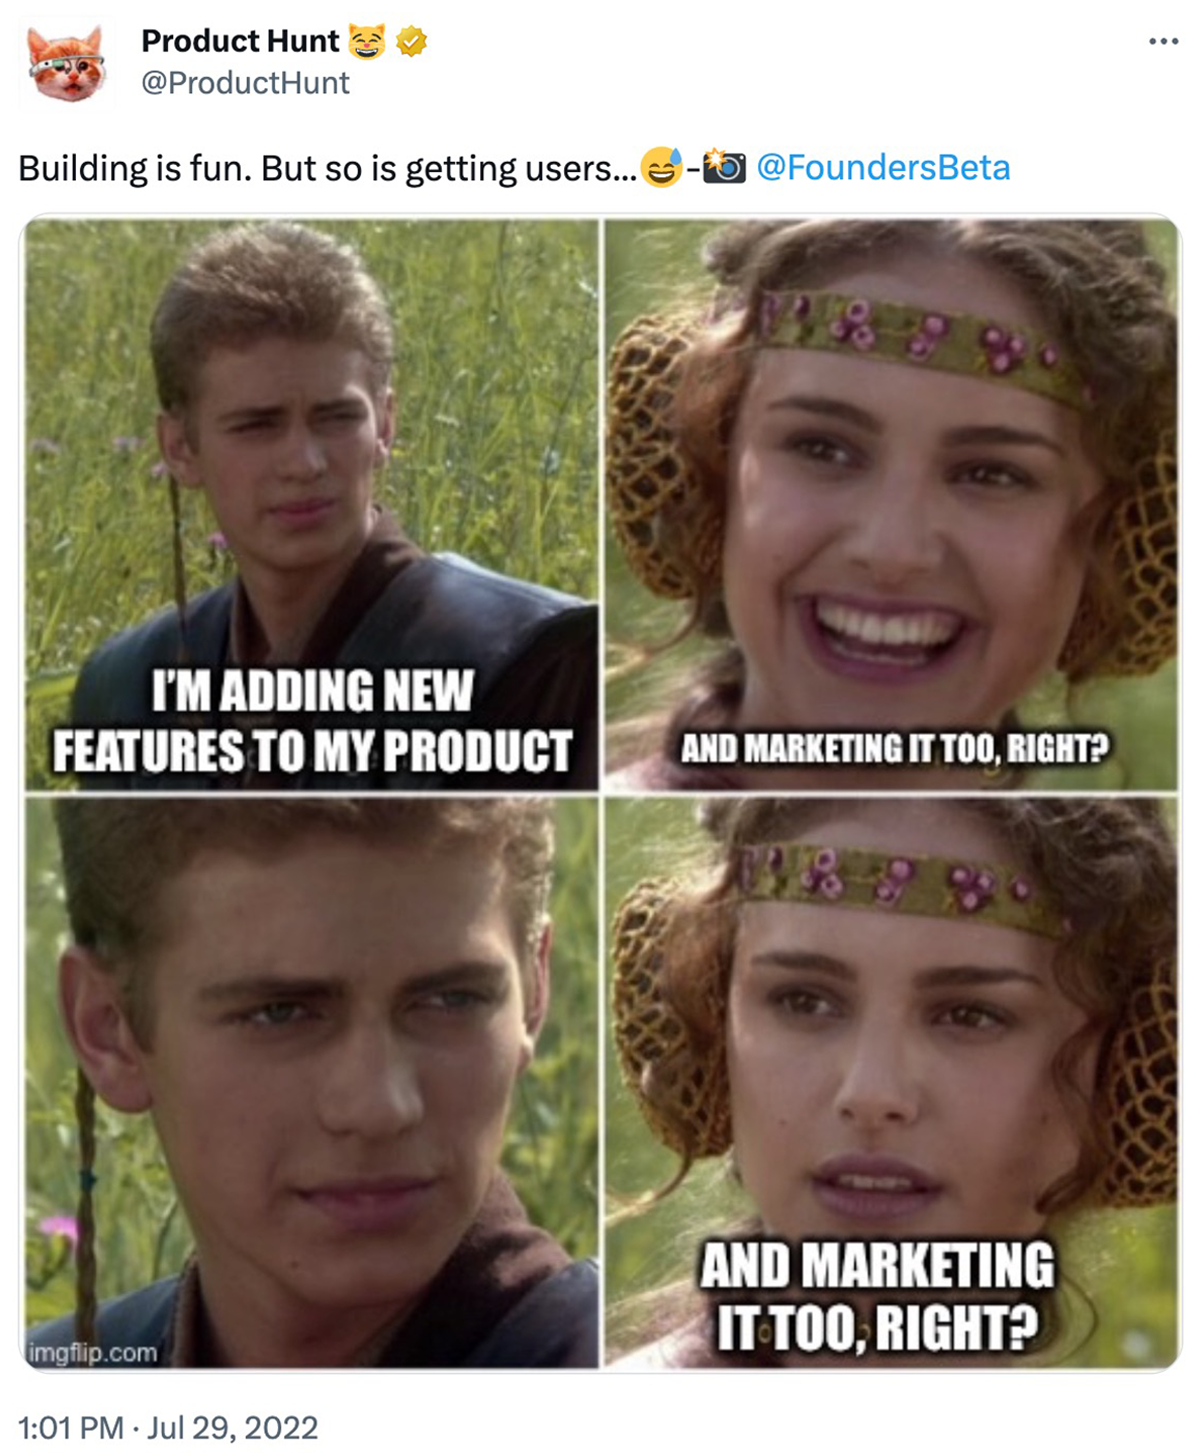 @producthunt on twitter: Building is fun. But so is getting users... Star Wars meme with Anakin and Padme. Anakin says I'm adding new features to my product and Padme says And marketing it too, right? When Anakin doesn't respond she repeats herself with a horrified look on her face.